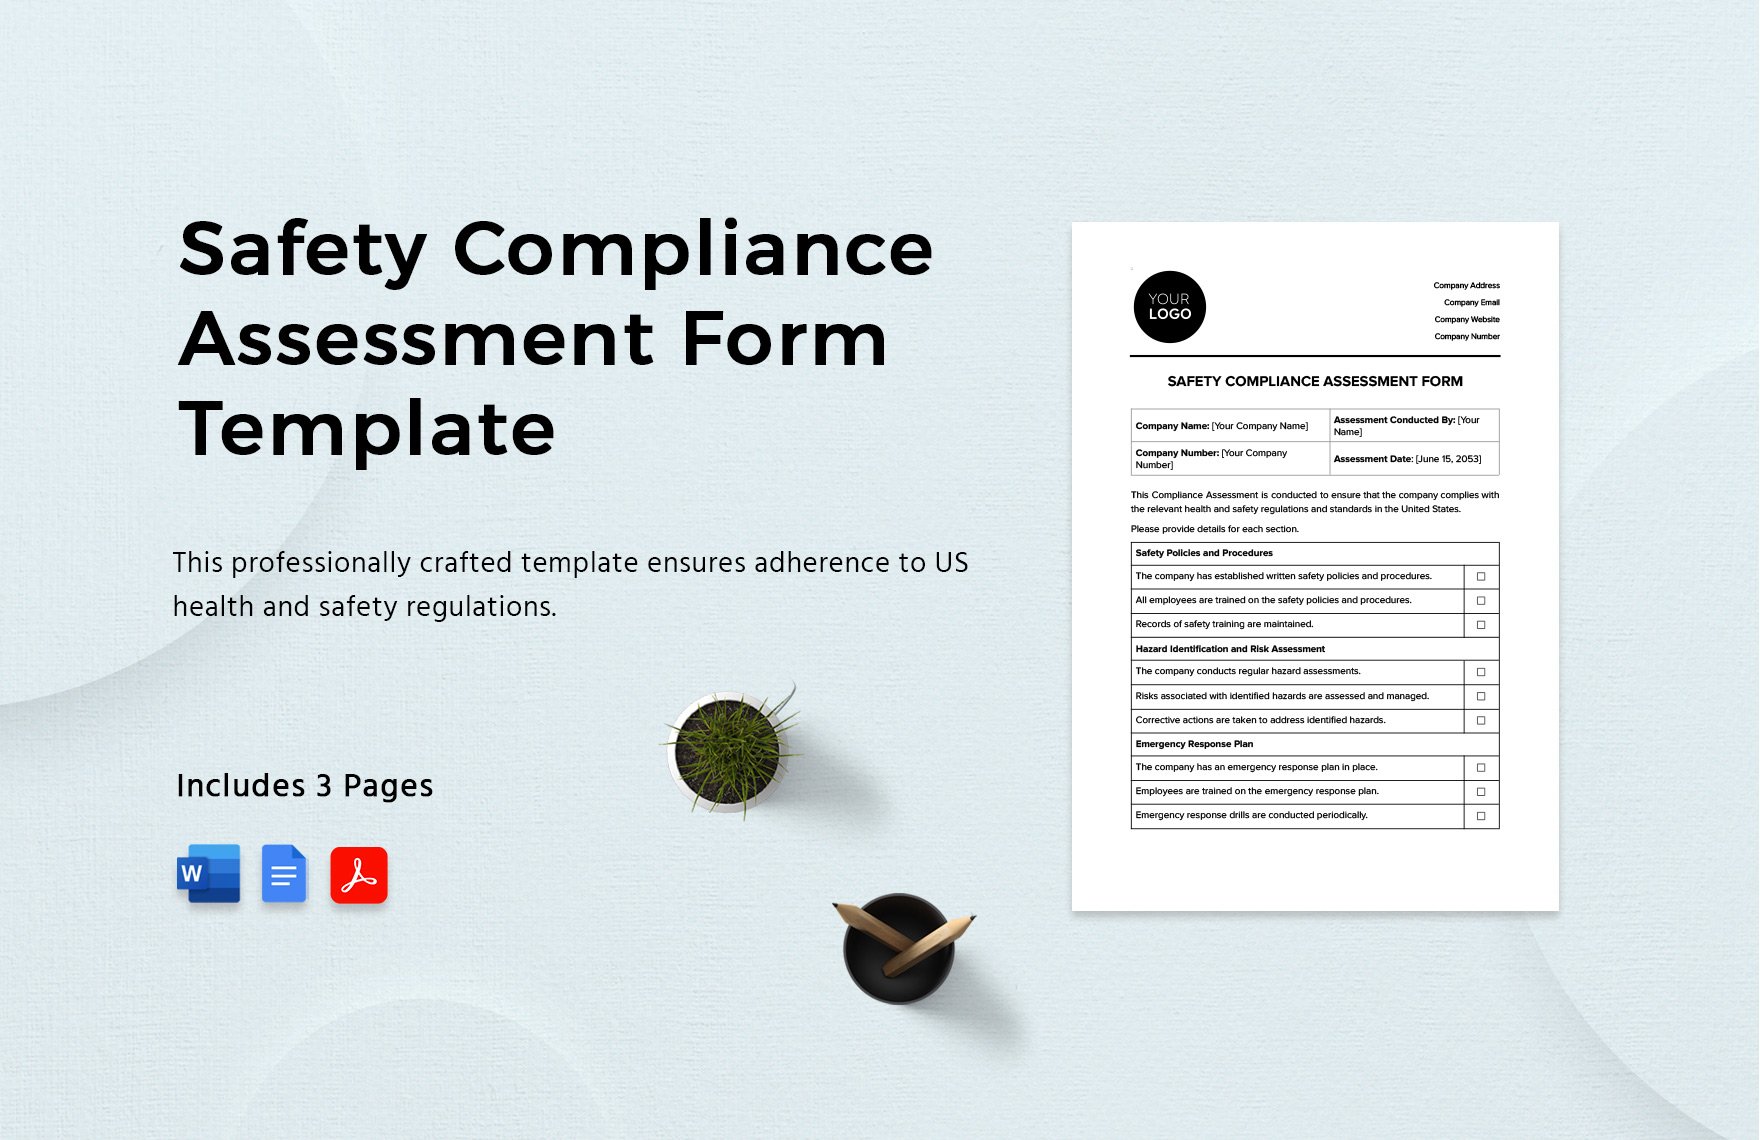  Safety Compliance Assessment Form Template